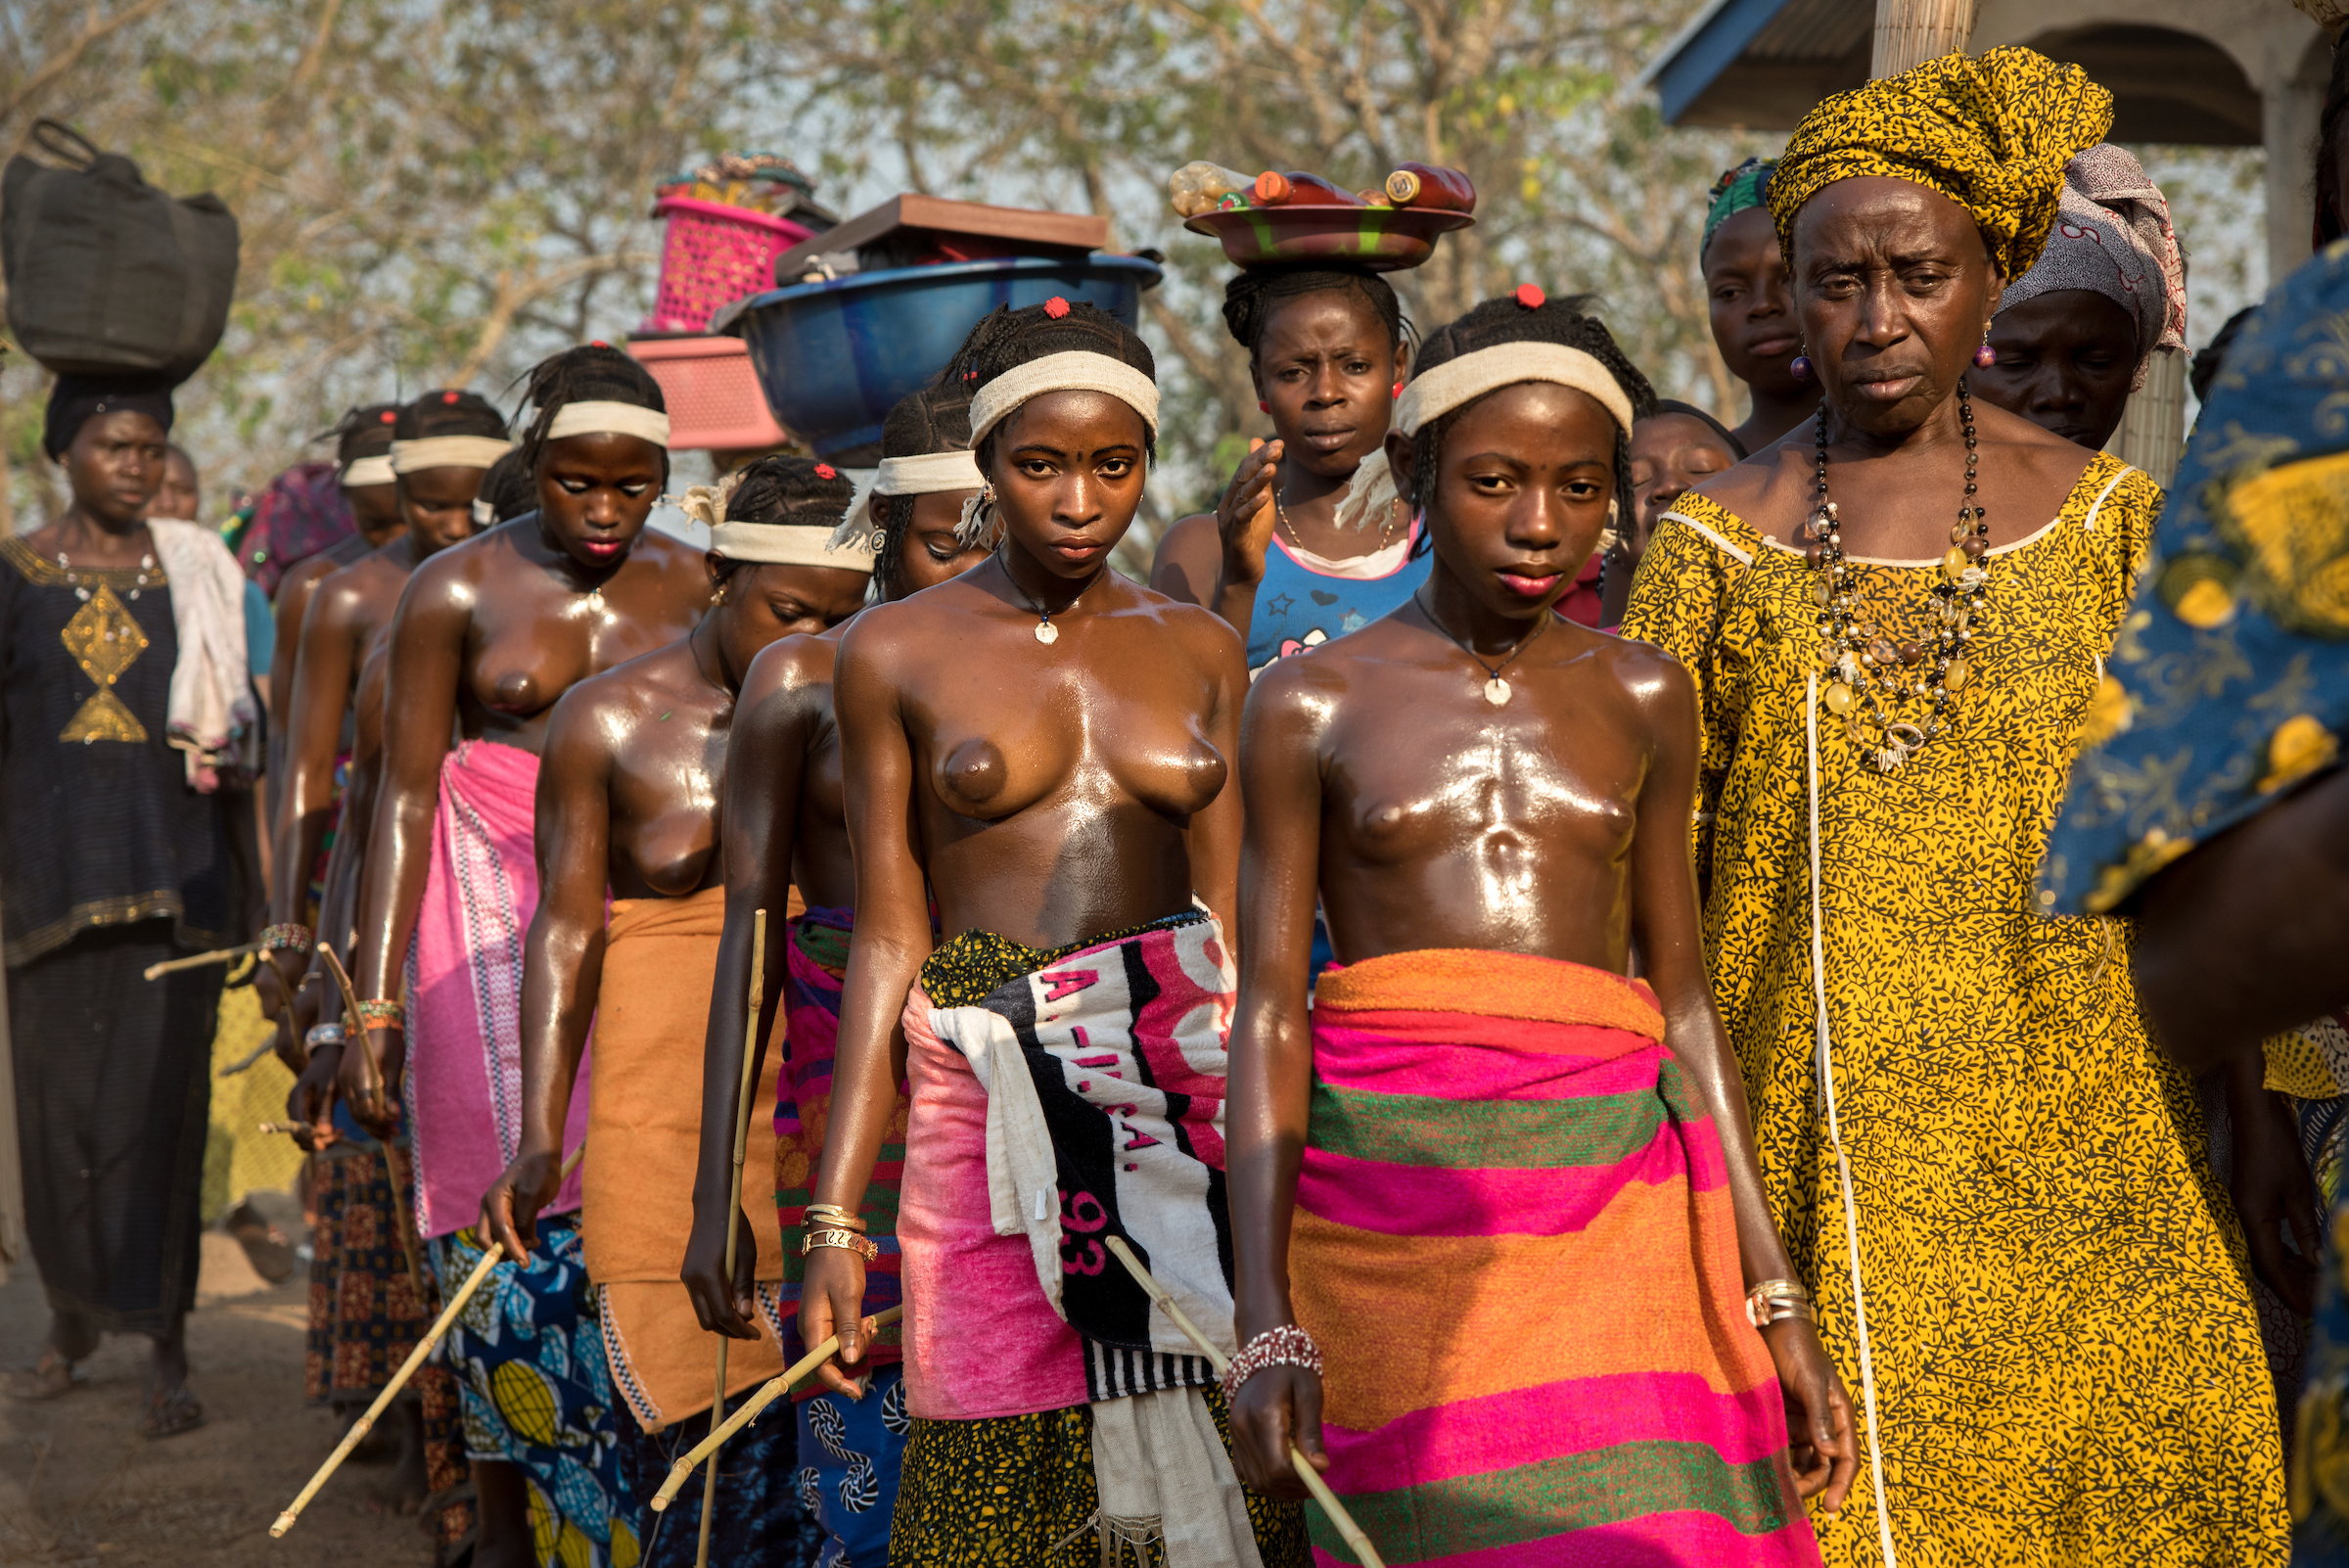 Adolescent girls return from the bush at the conclusion of their initiation ceremony.